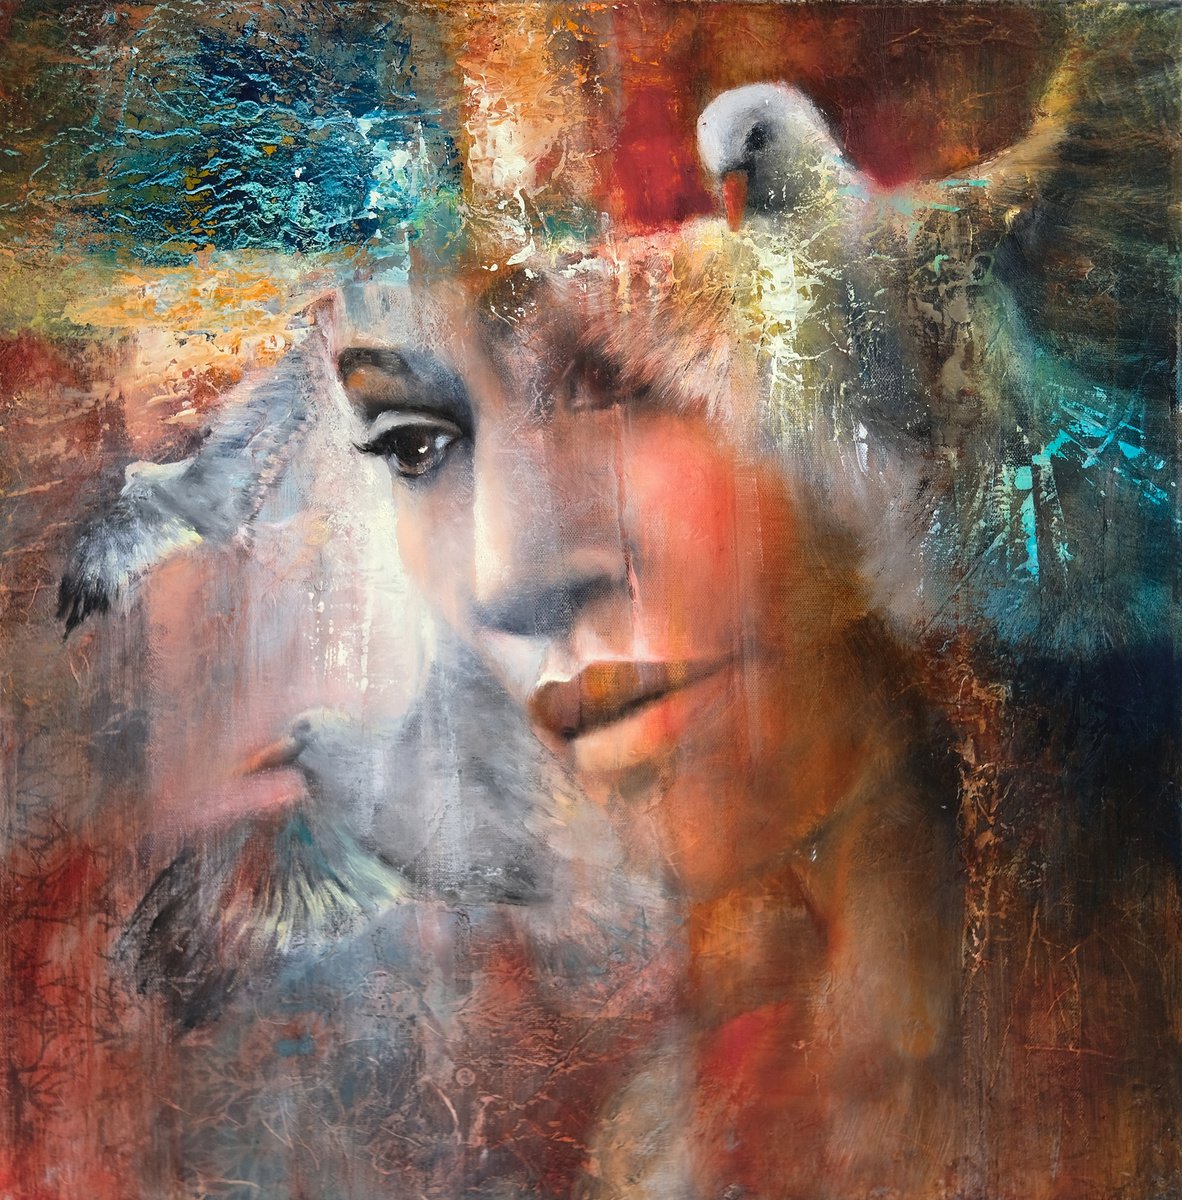 And I dreamed I was flying by Annette Schmucker